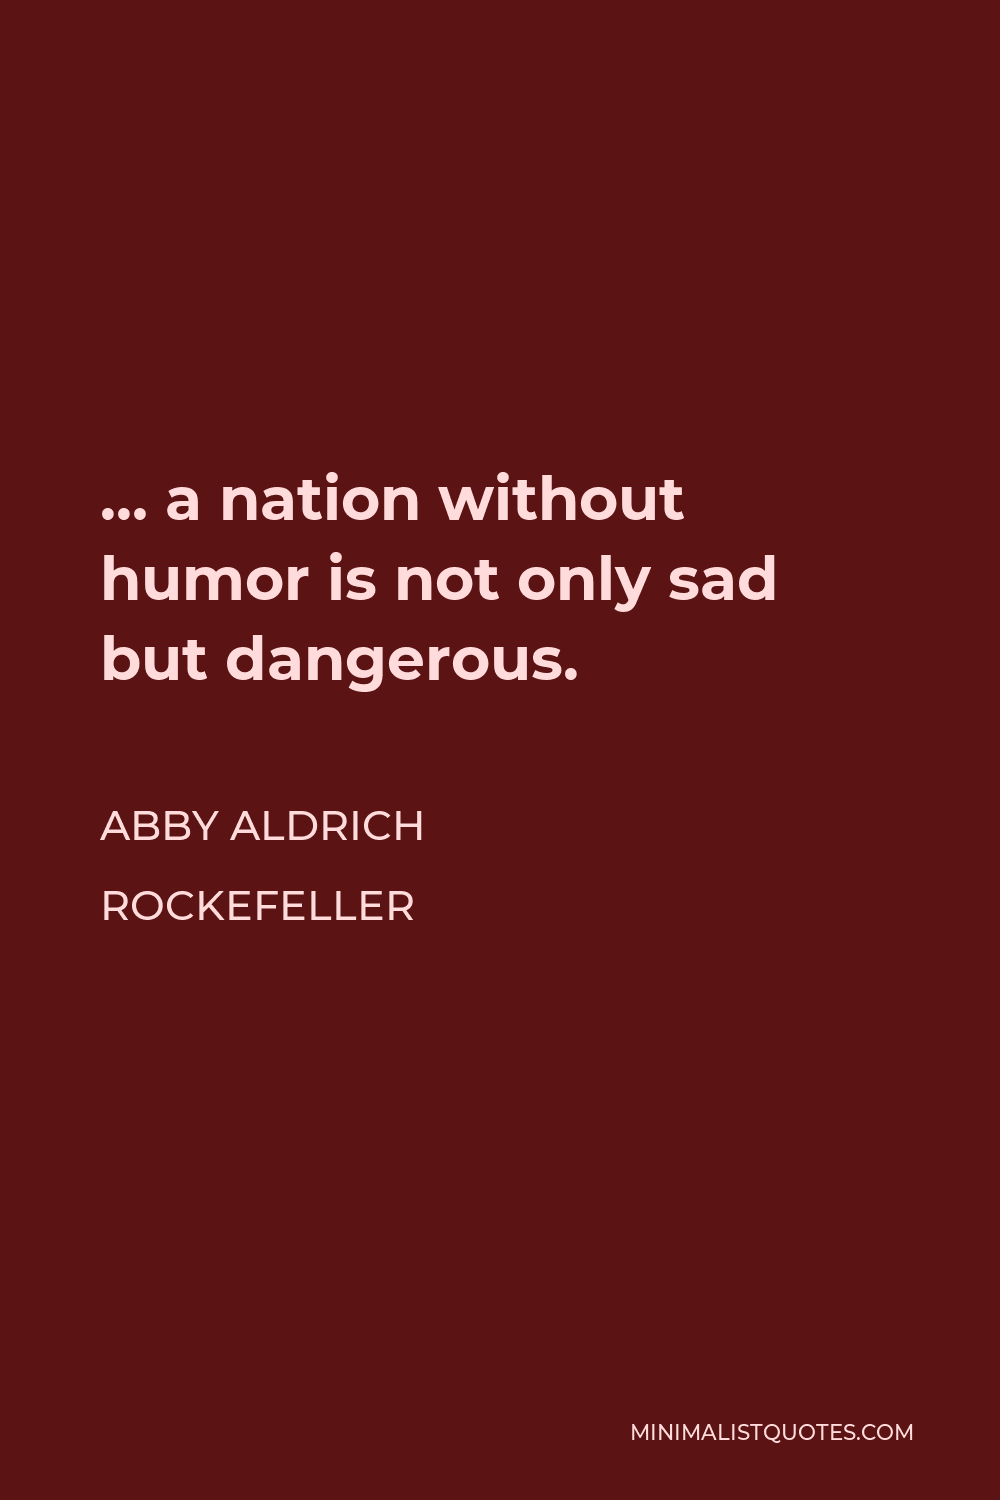 Abby Aldrich Rockefeller Quote - … a nation without humor is not only sad but dangerous.